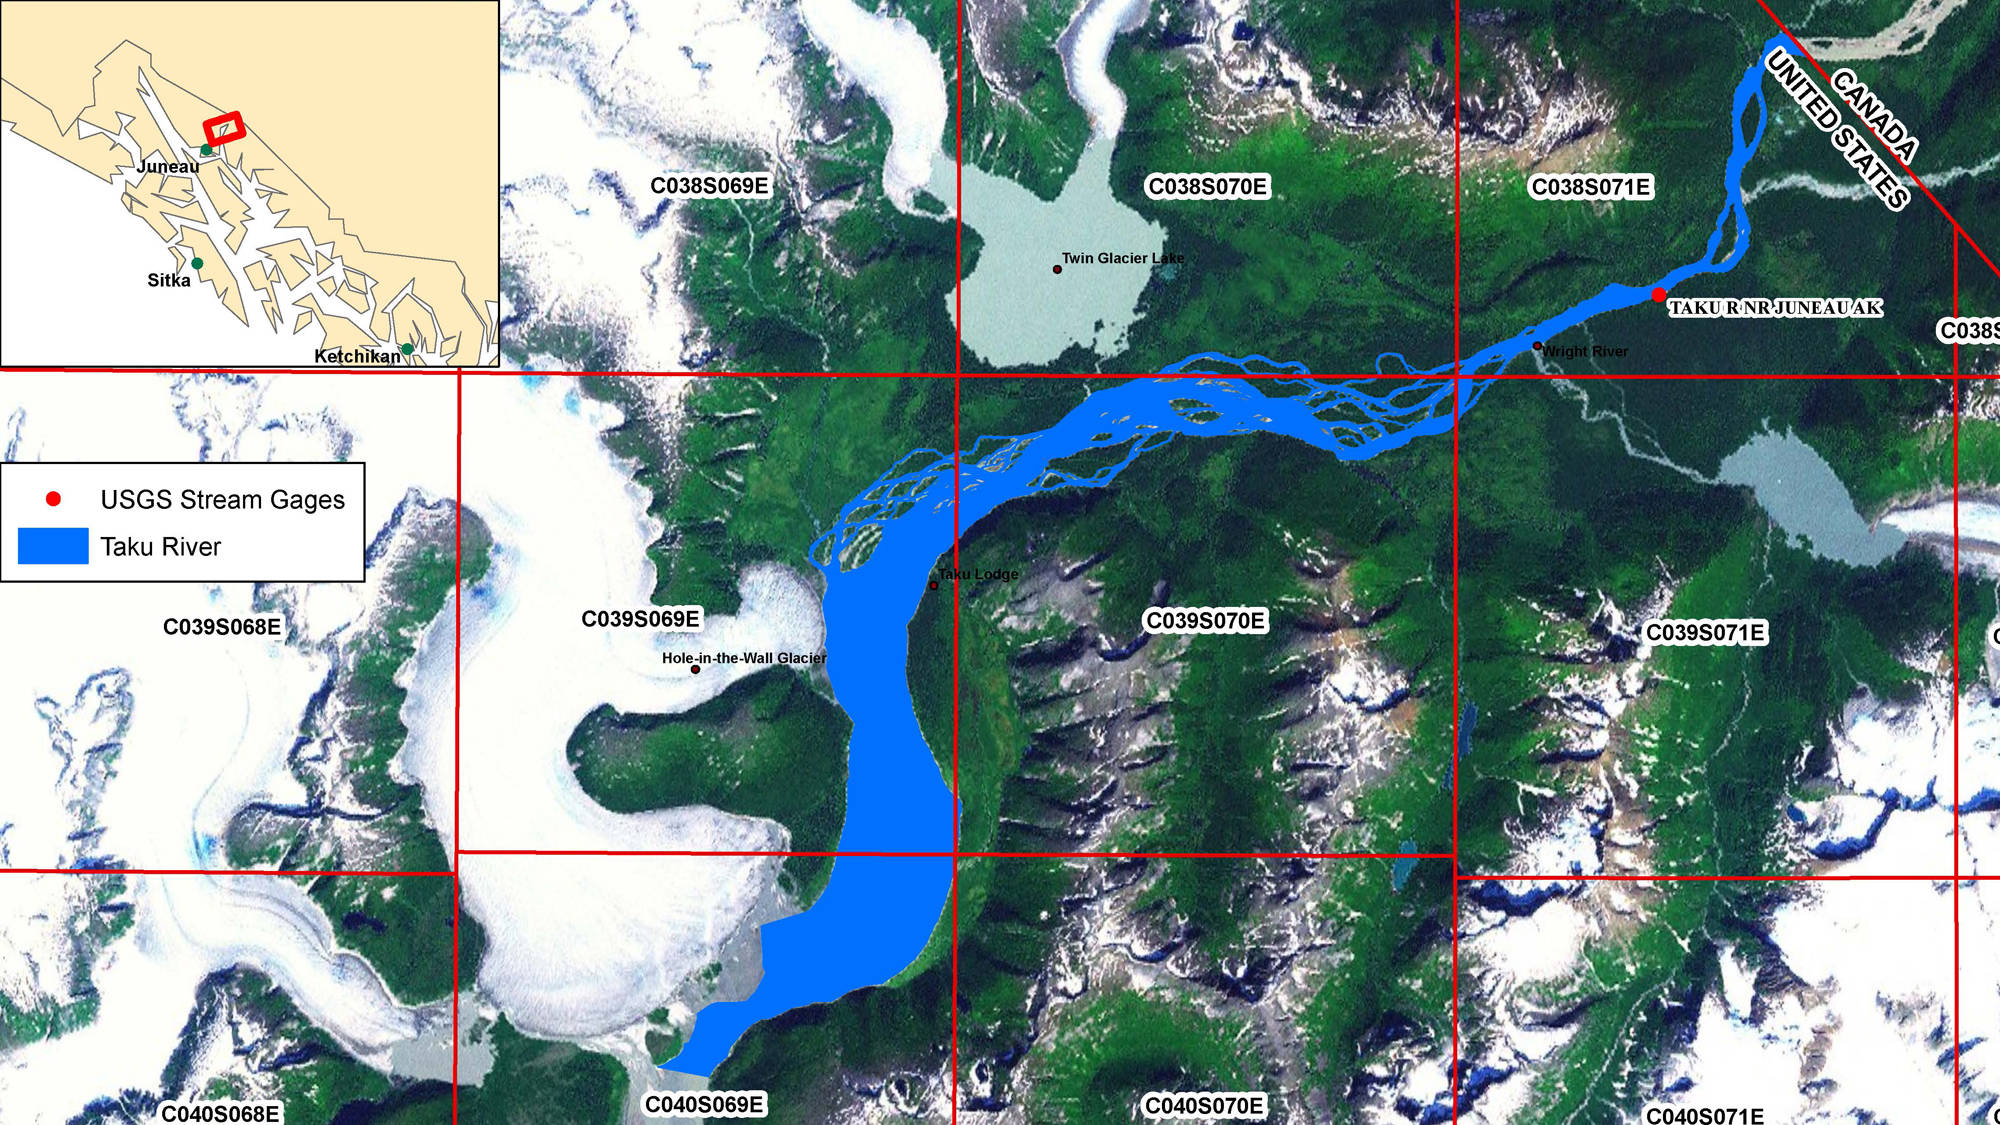 The State of Alaska has applied to take control of the land under the Taku River. The lands the state is asking for are pictured in blue. (Map courtesy Bureau of Land Management)